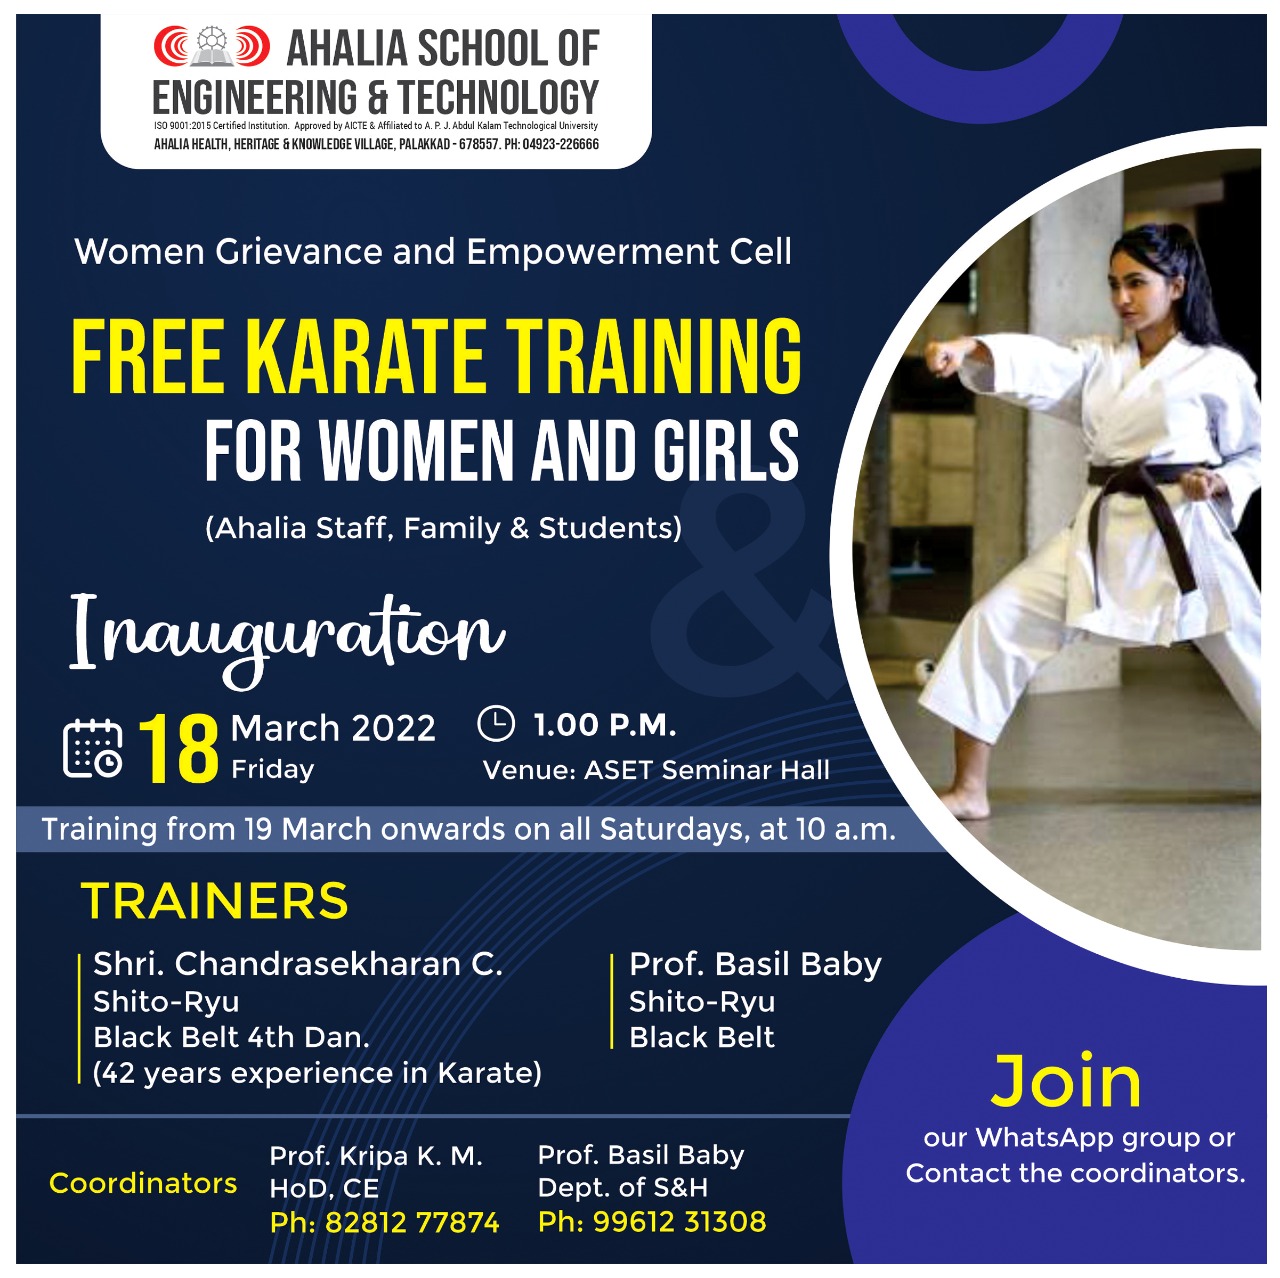 Free Karate Training for Women and Girls